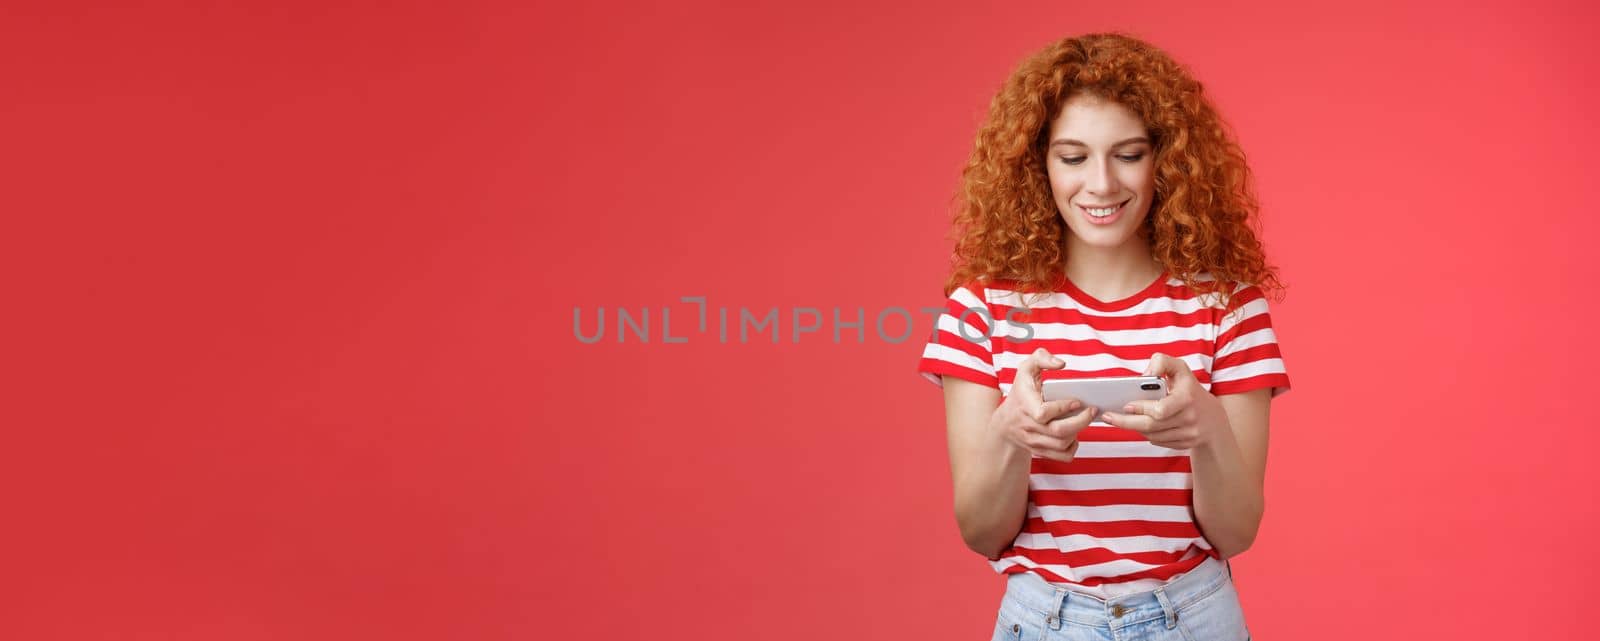 Lifestyle. Redhead girl fool around waiting queue dentist playing awesome smartphone game hold phone horizontal tap cellphone screen look telephone display smiling delighted entertained standing red background.